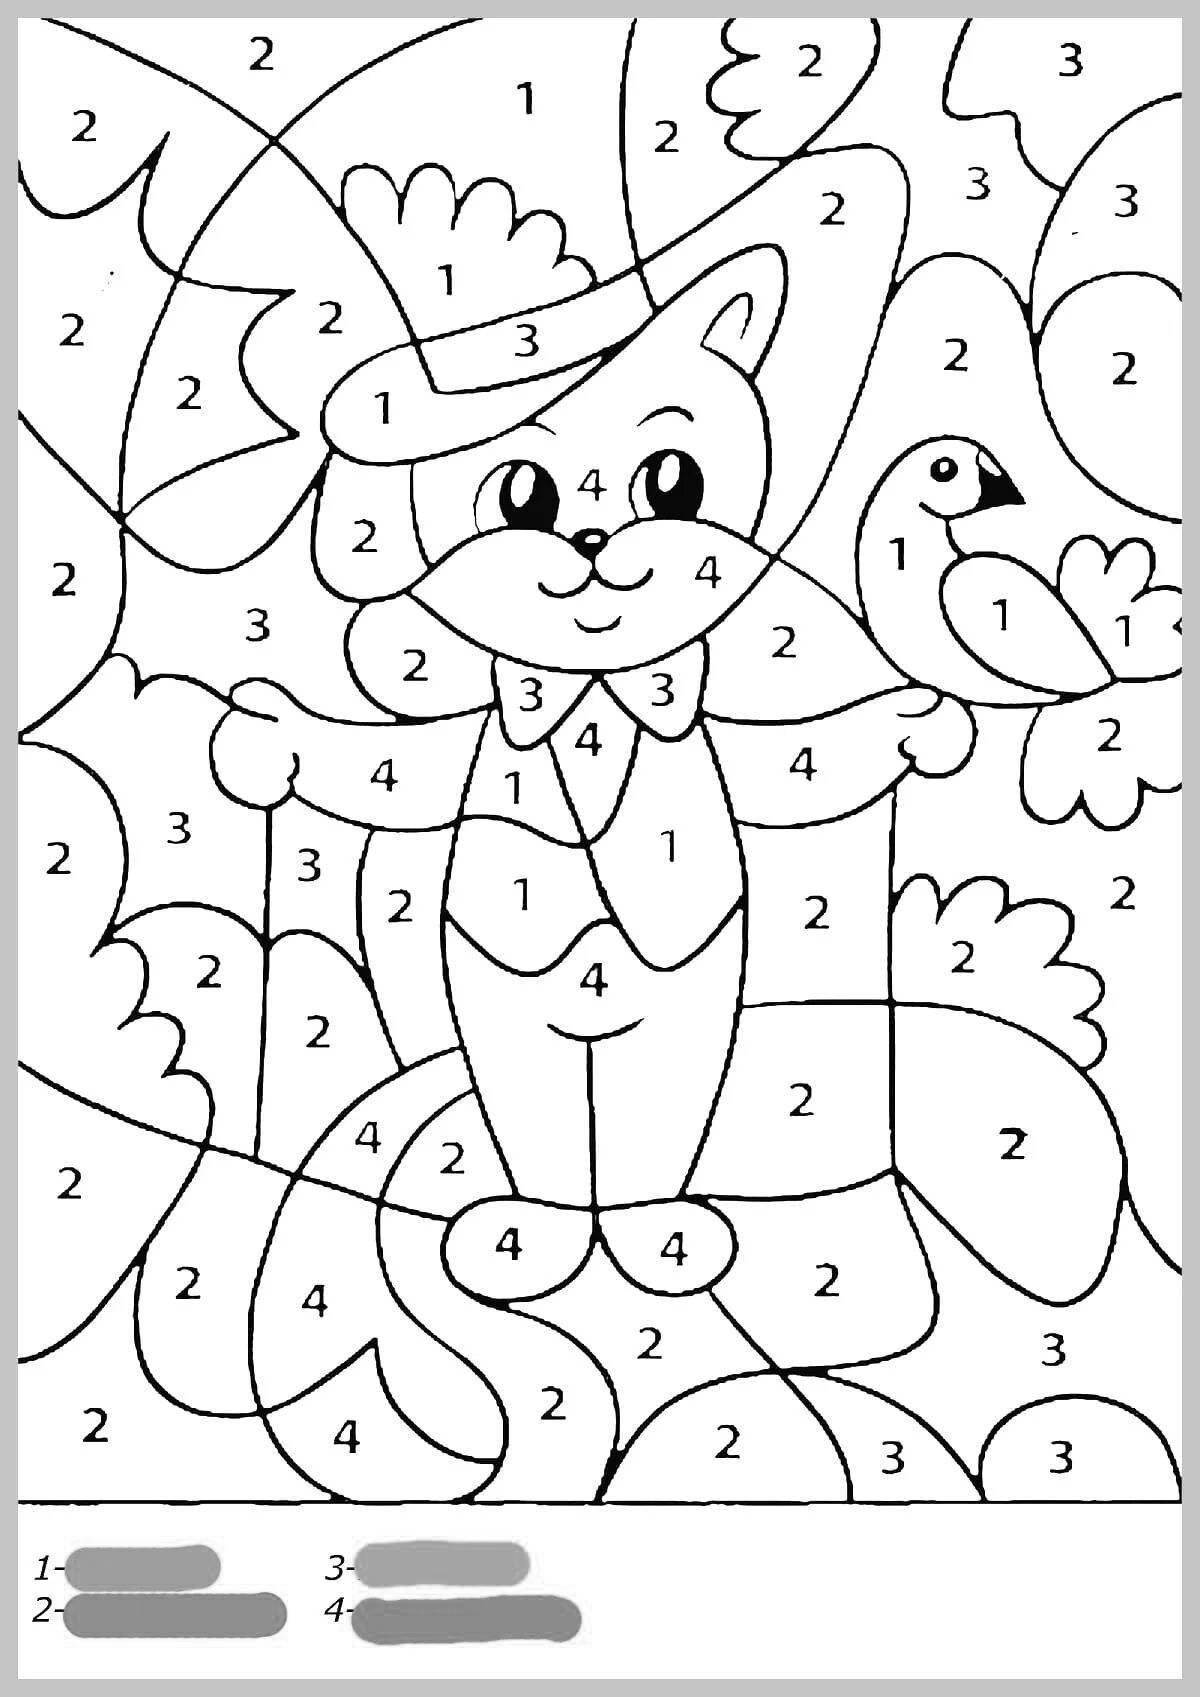 Fun download by numbers coloring book